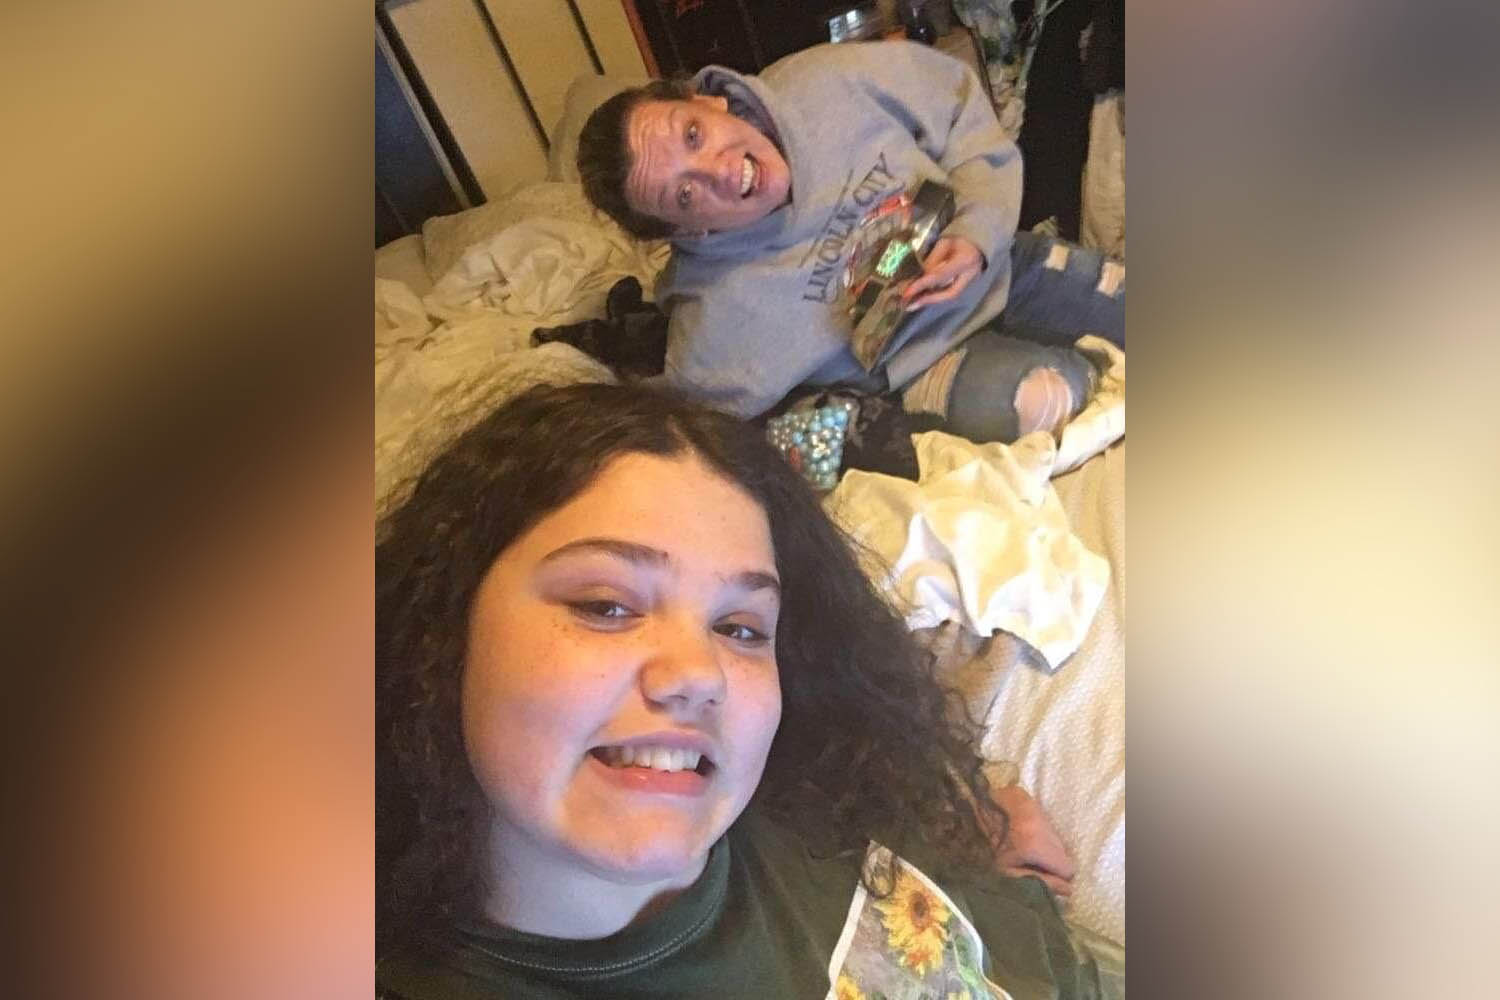 13-year-old girl severely burned while imitating TikTok video, family says 